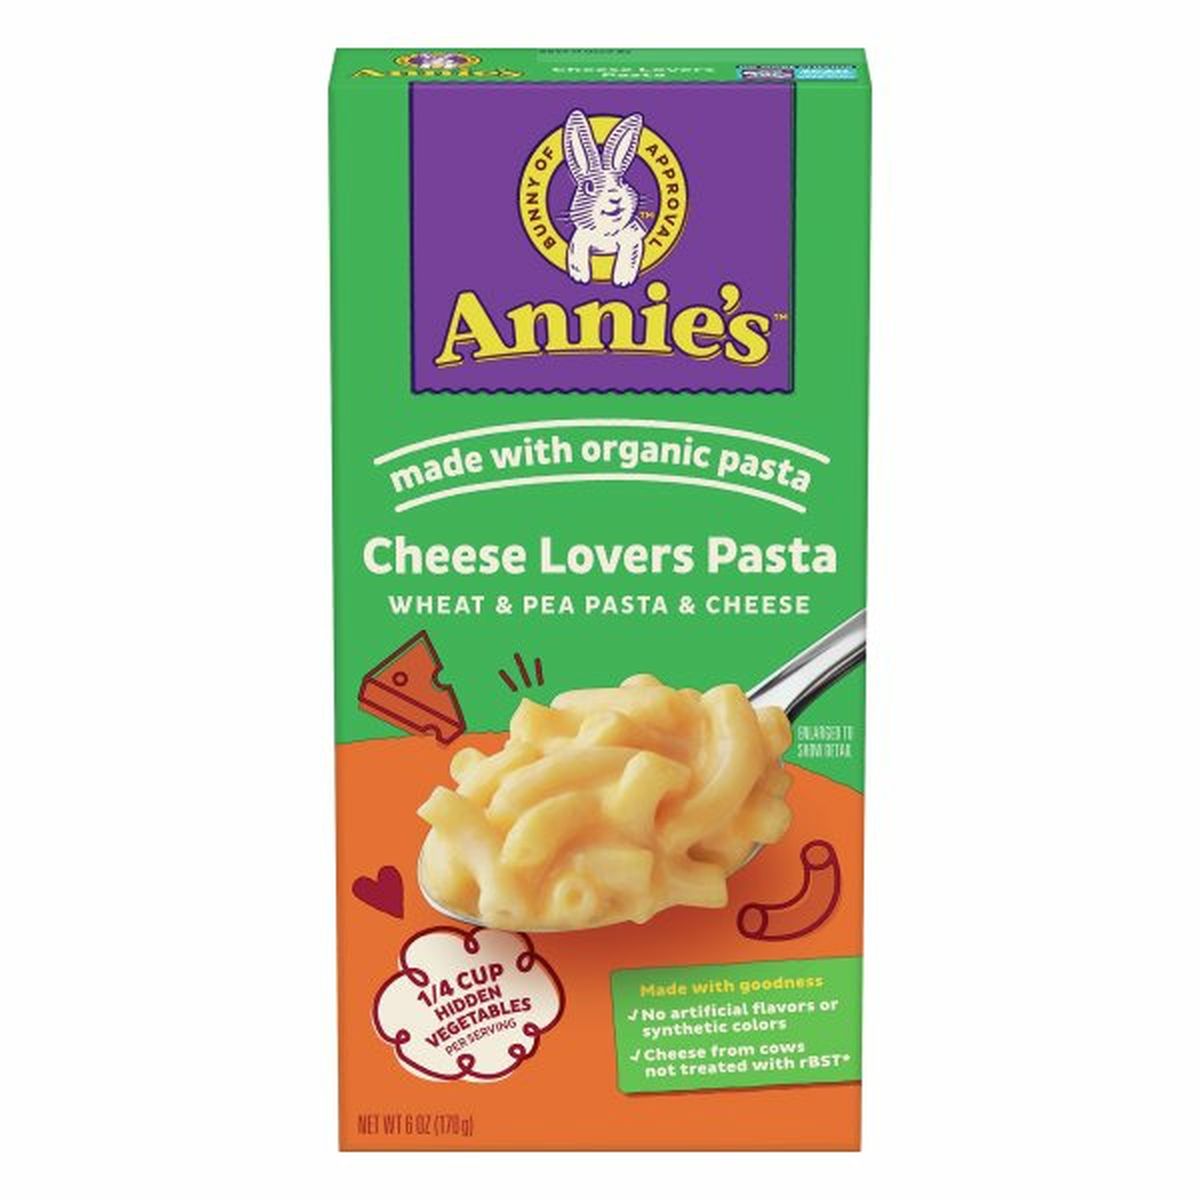 Calories in Annie's Pasta, Cheese Lovers